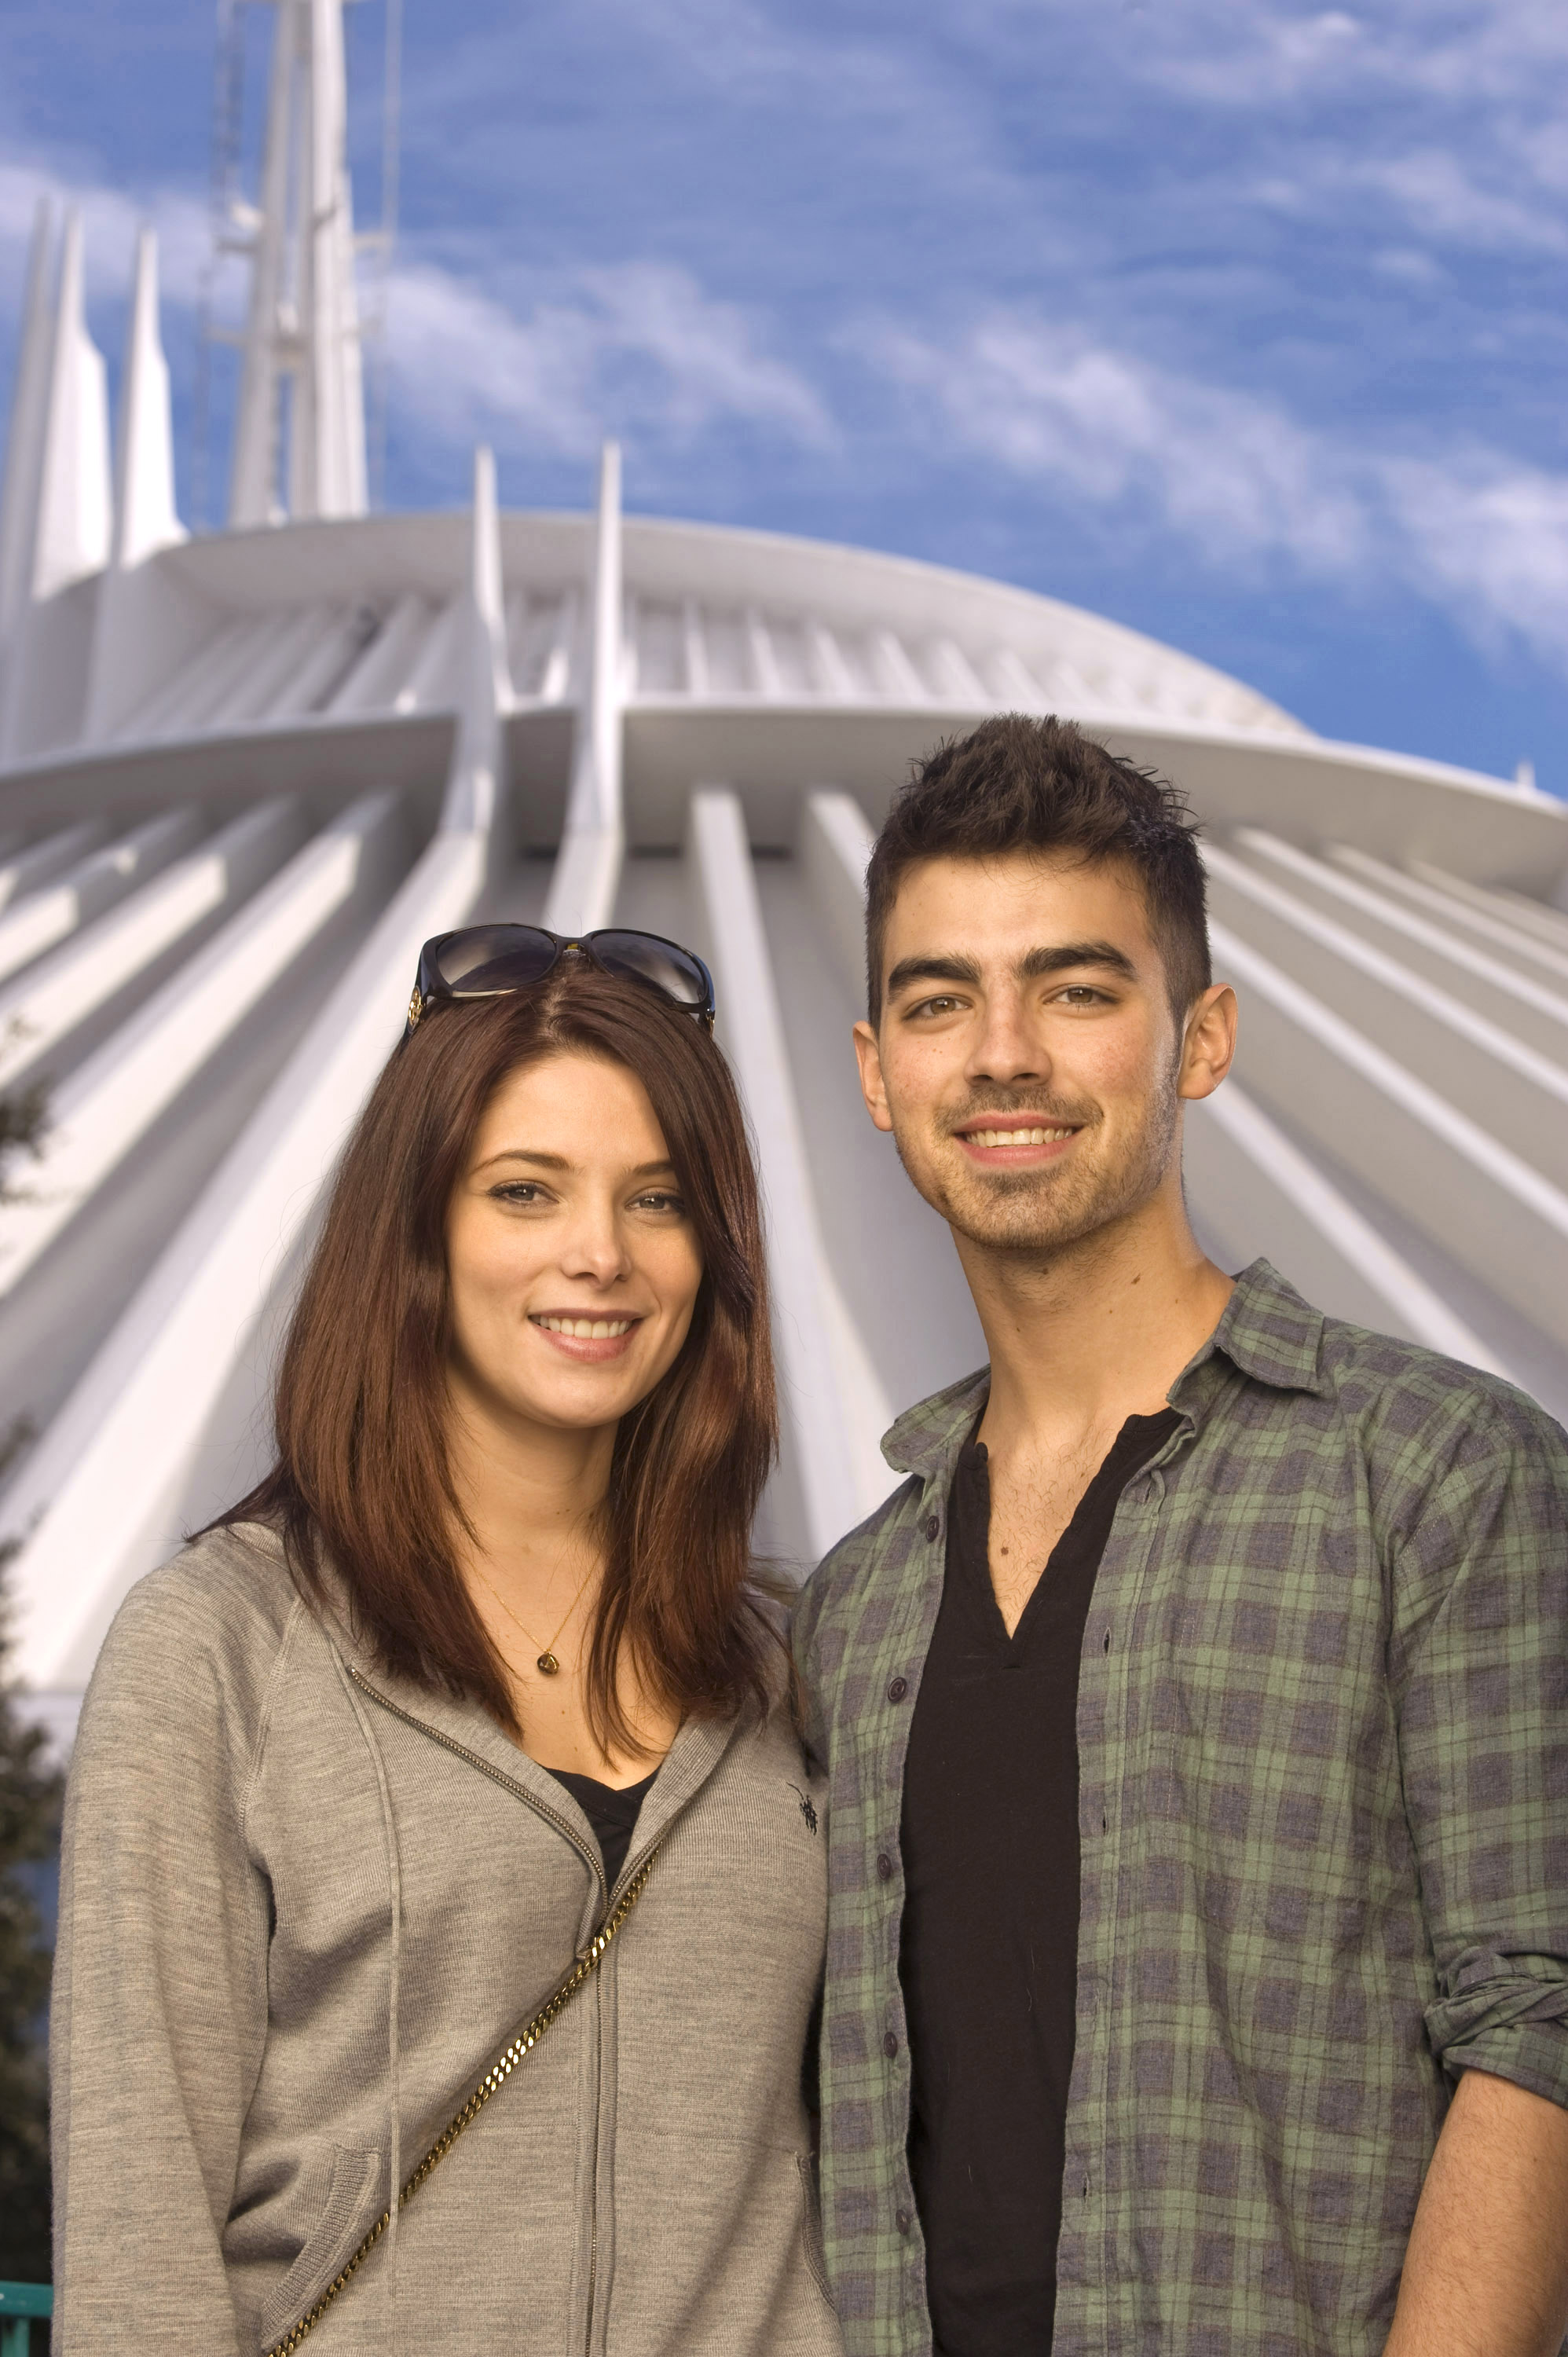 Joe Jonas and Ashley Greene pictured together at the Magic Kingdom in December 2010